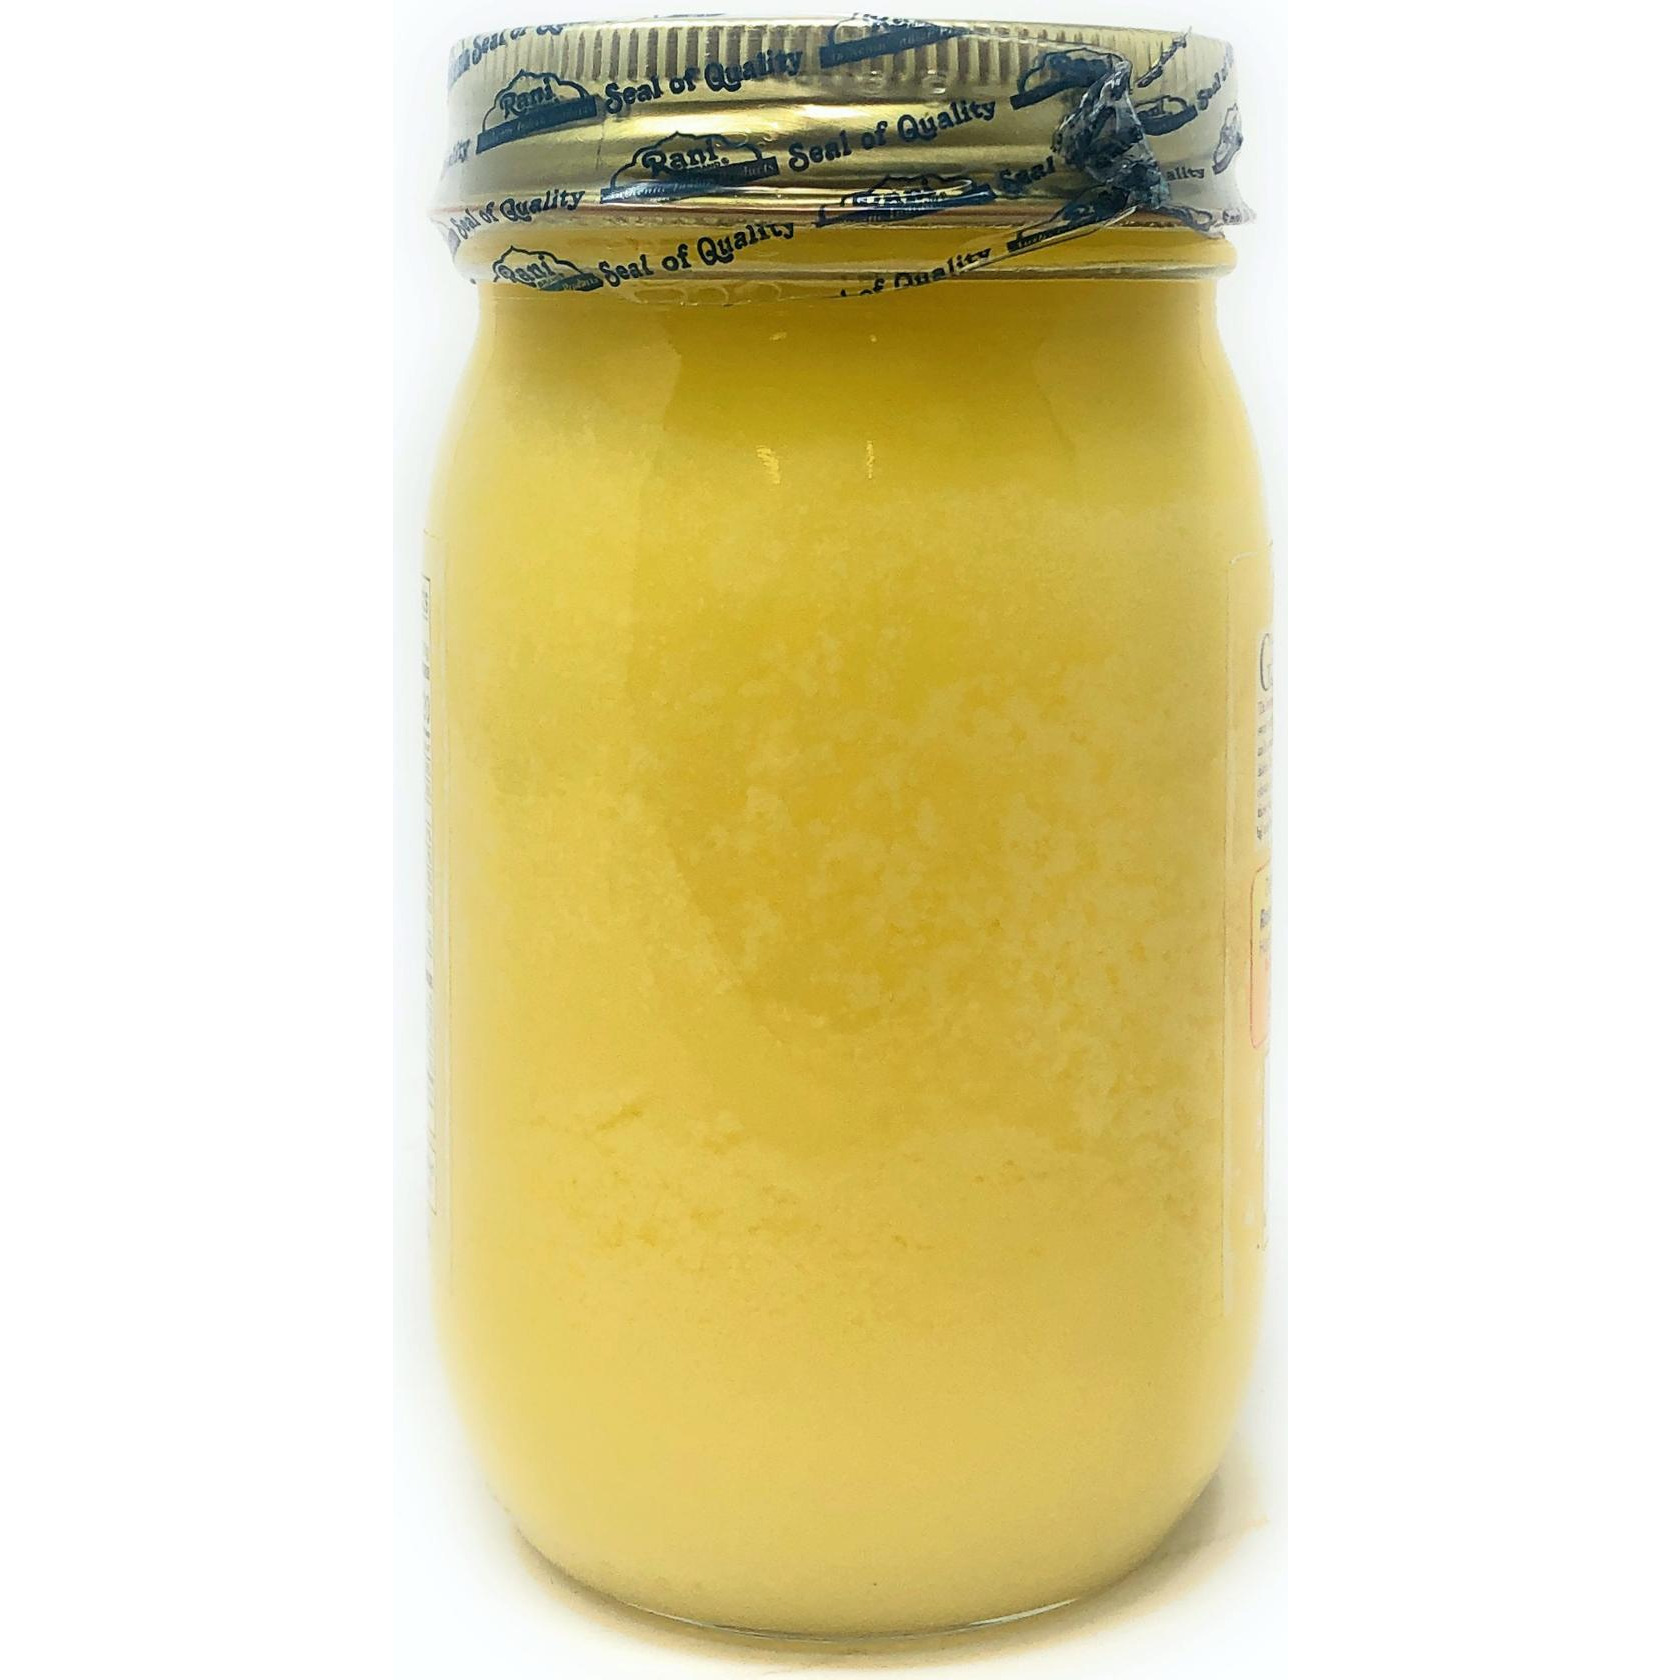 Rani Pure Natural Ghee from Grass Fed Cows (Clarified Butter) 1lb (16oz) ~ Glass Jar | Paleo Friendly | Keto Friendly | Gluten Free